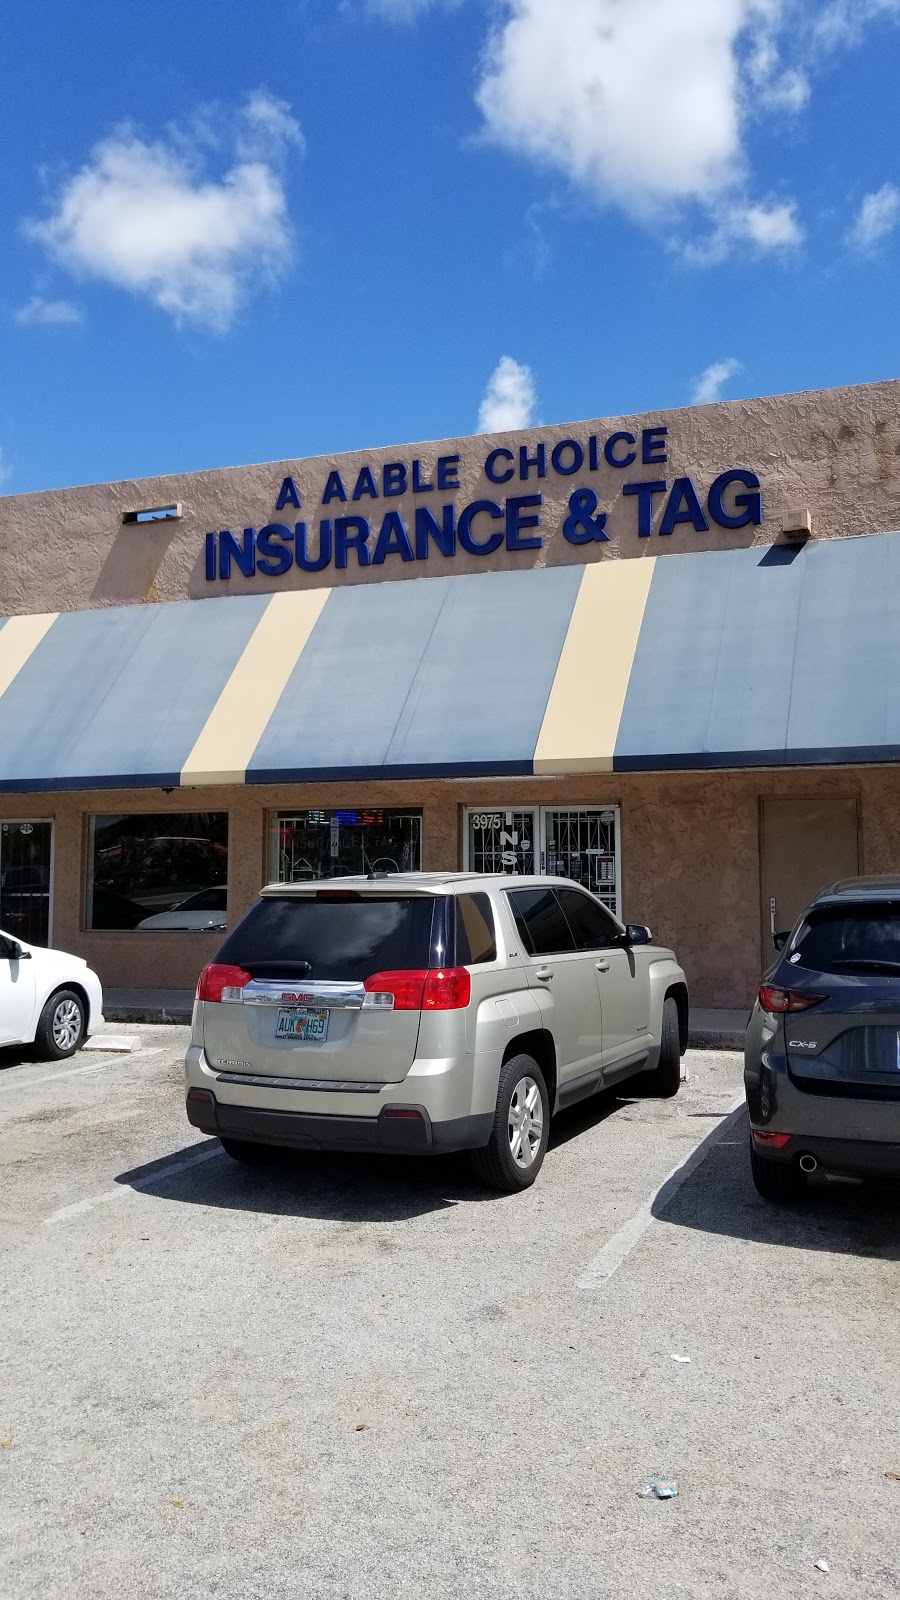 A Aable Choice Insurance & Tag | 3975 NW 19th St, Lauderdale Lakes, FL 33311 | Phone: (954) 730-0373